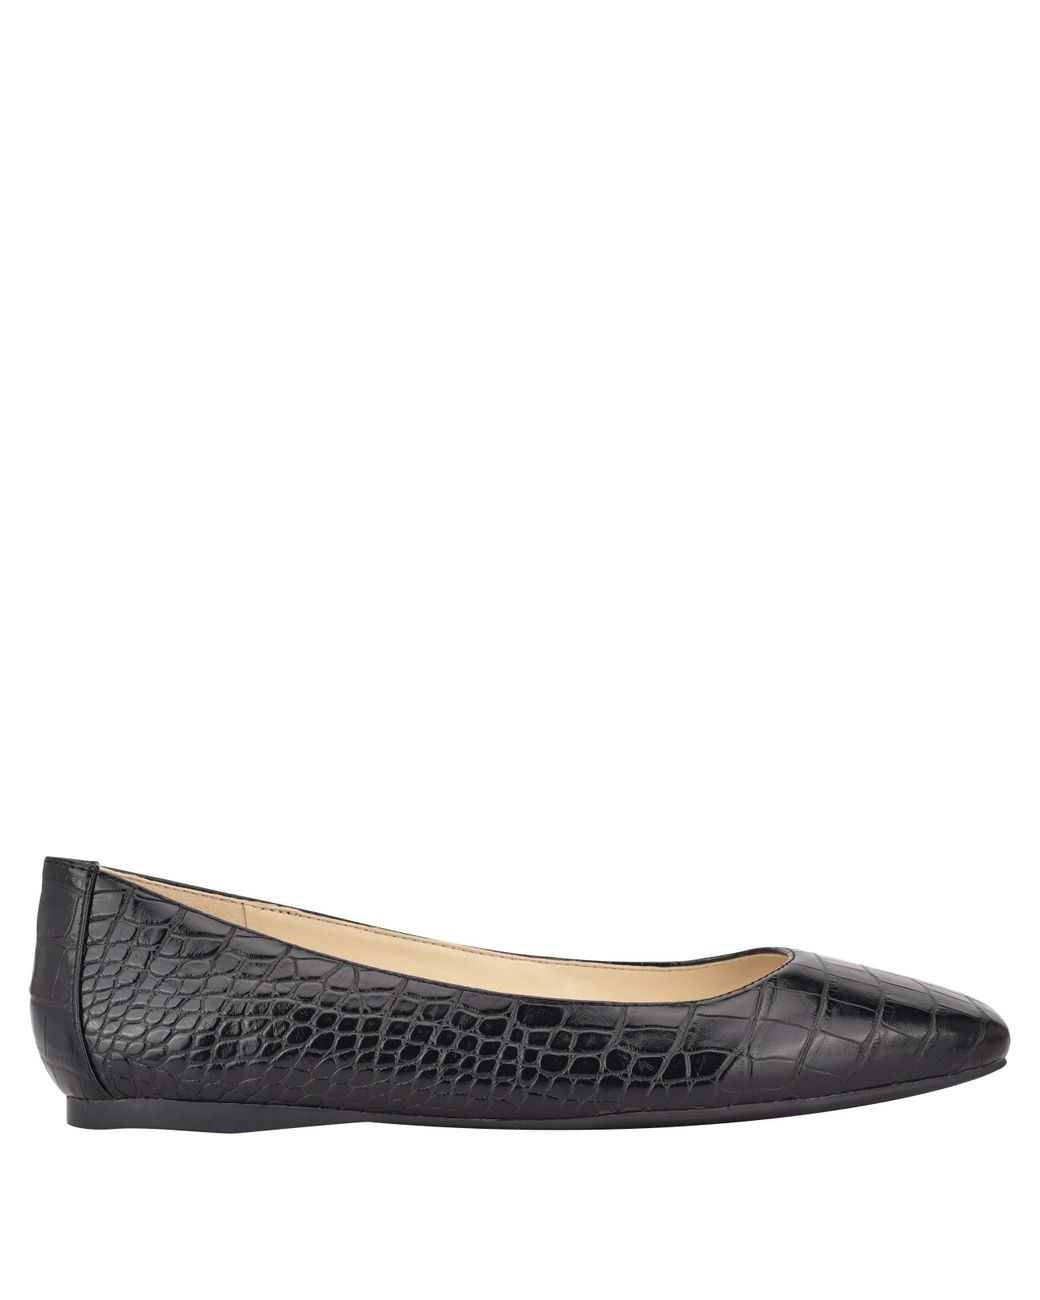 Nine West Alena Square-toe Flats in Black - Lyst